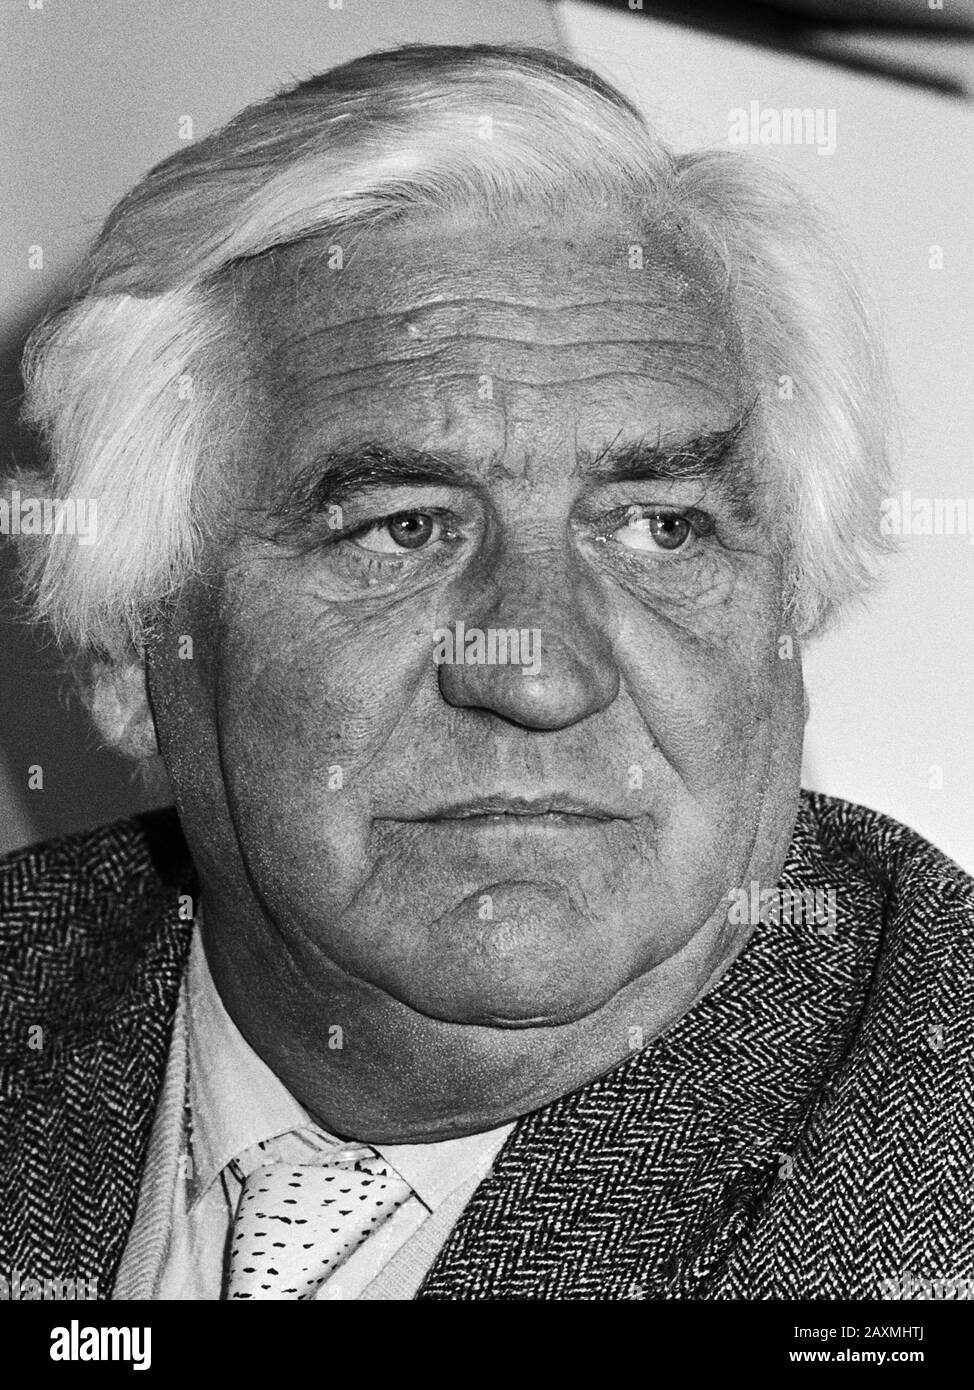 Feyenoord press conference related to appoint new coach Hans Kraay at Feyenoord; Couwenberg January 27, 1982 Stock Photo